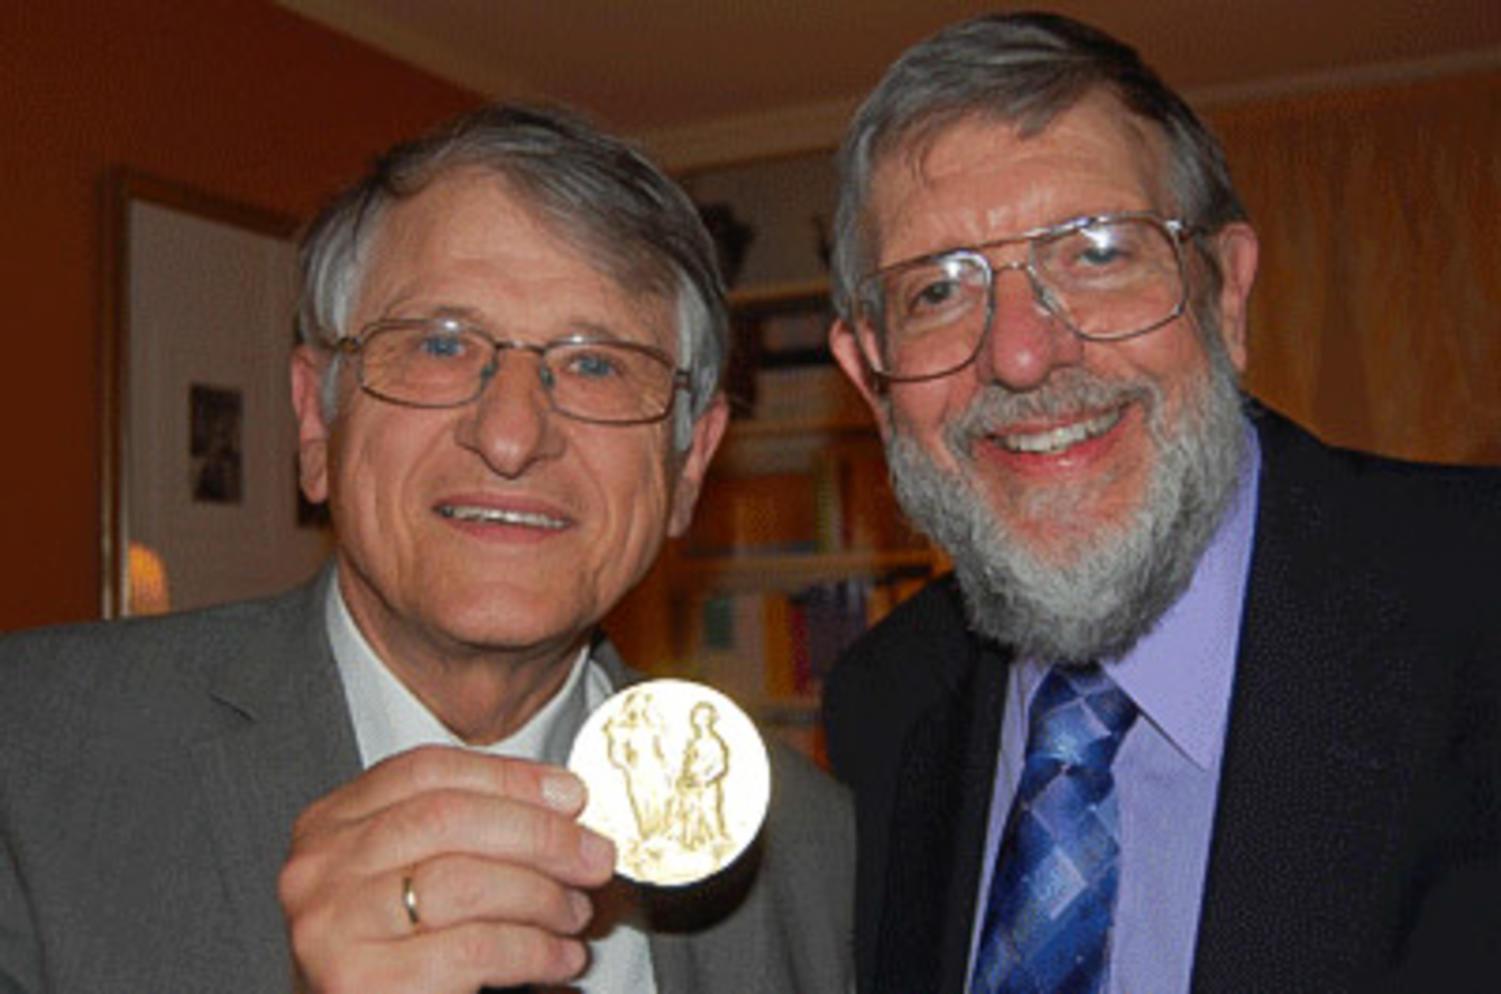 Klaus von Klitzing (left) and William Phillips sport von Klitzing’s Nobel award medal that he received in 1985. Phillips will be speaking at the 39th annual Nobel Laureate Lecture on April 11 in the University Student Union Ballrooms.